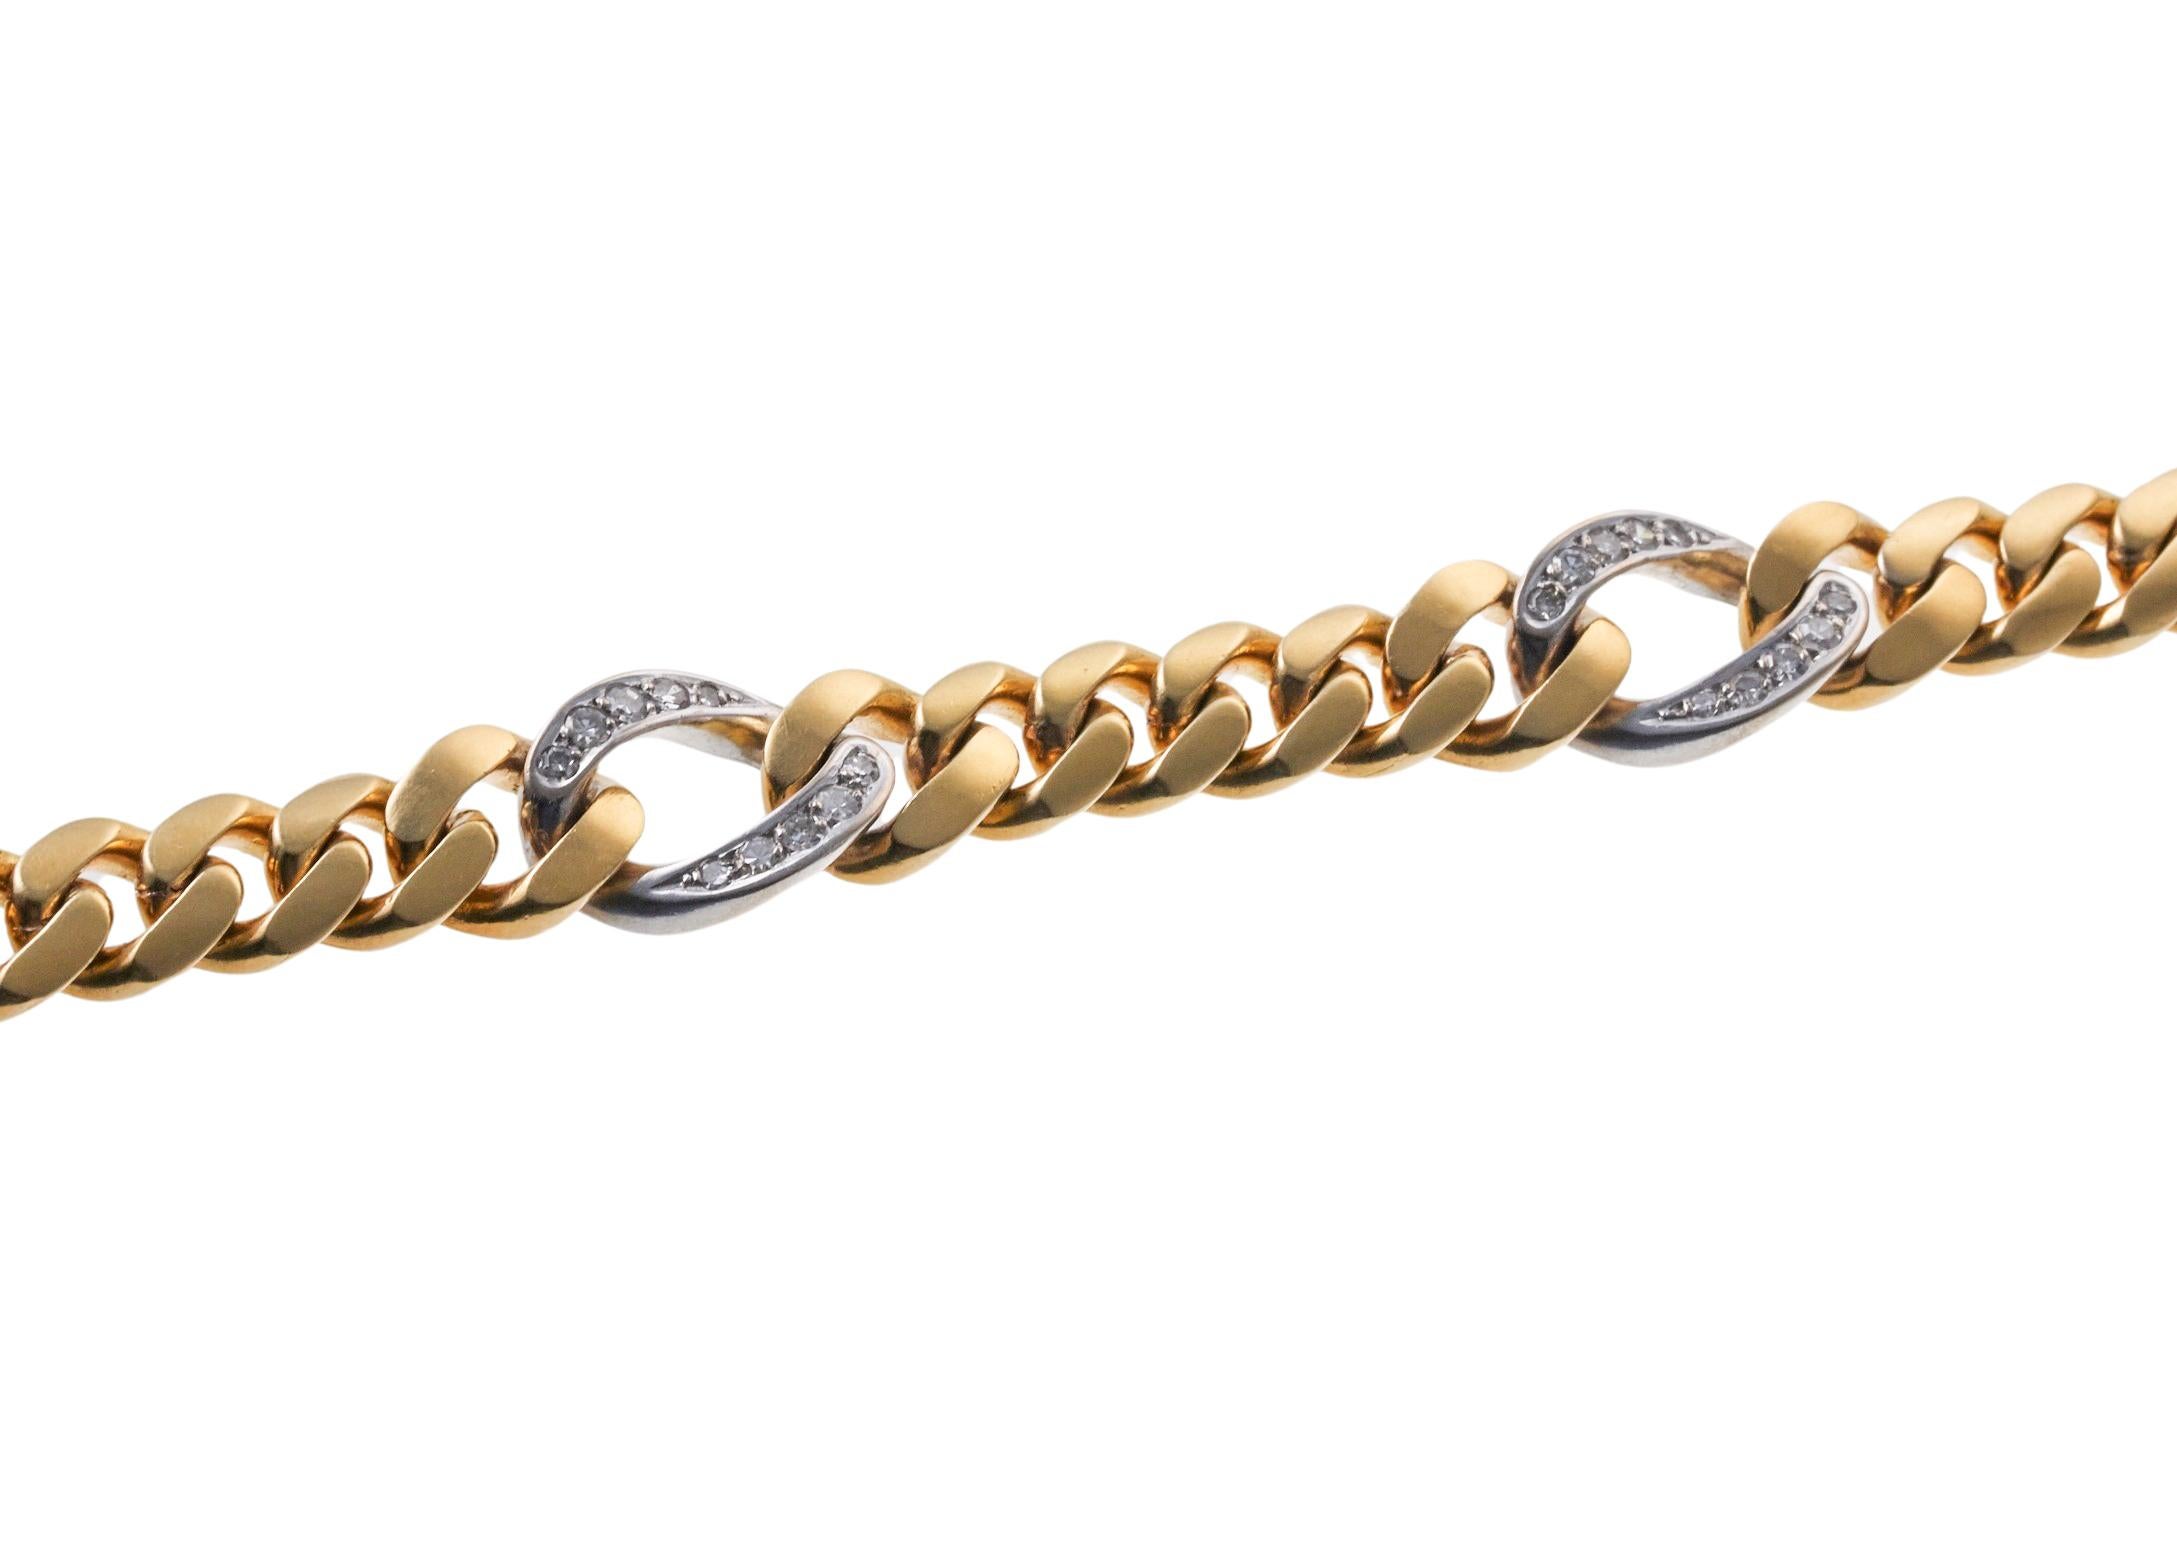 Continental 18k gold curb link bracelet, two tone gold, set with four diamonds links - total approx. 0.40ctw, single cut stones. Bracelet is 7 1/8